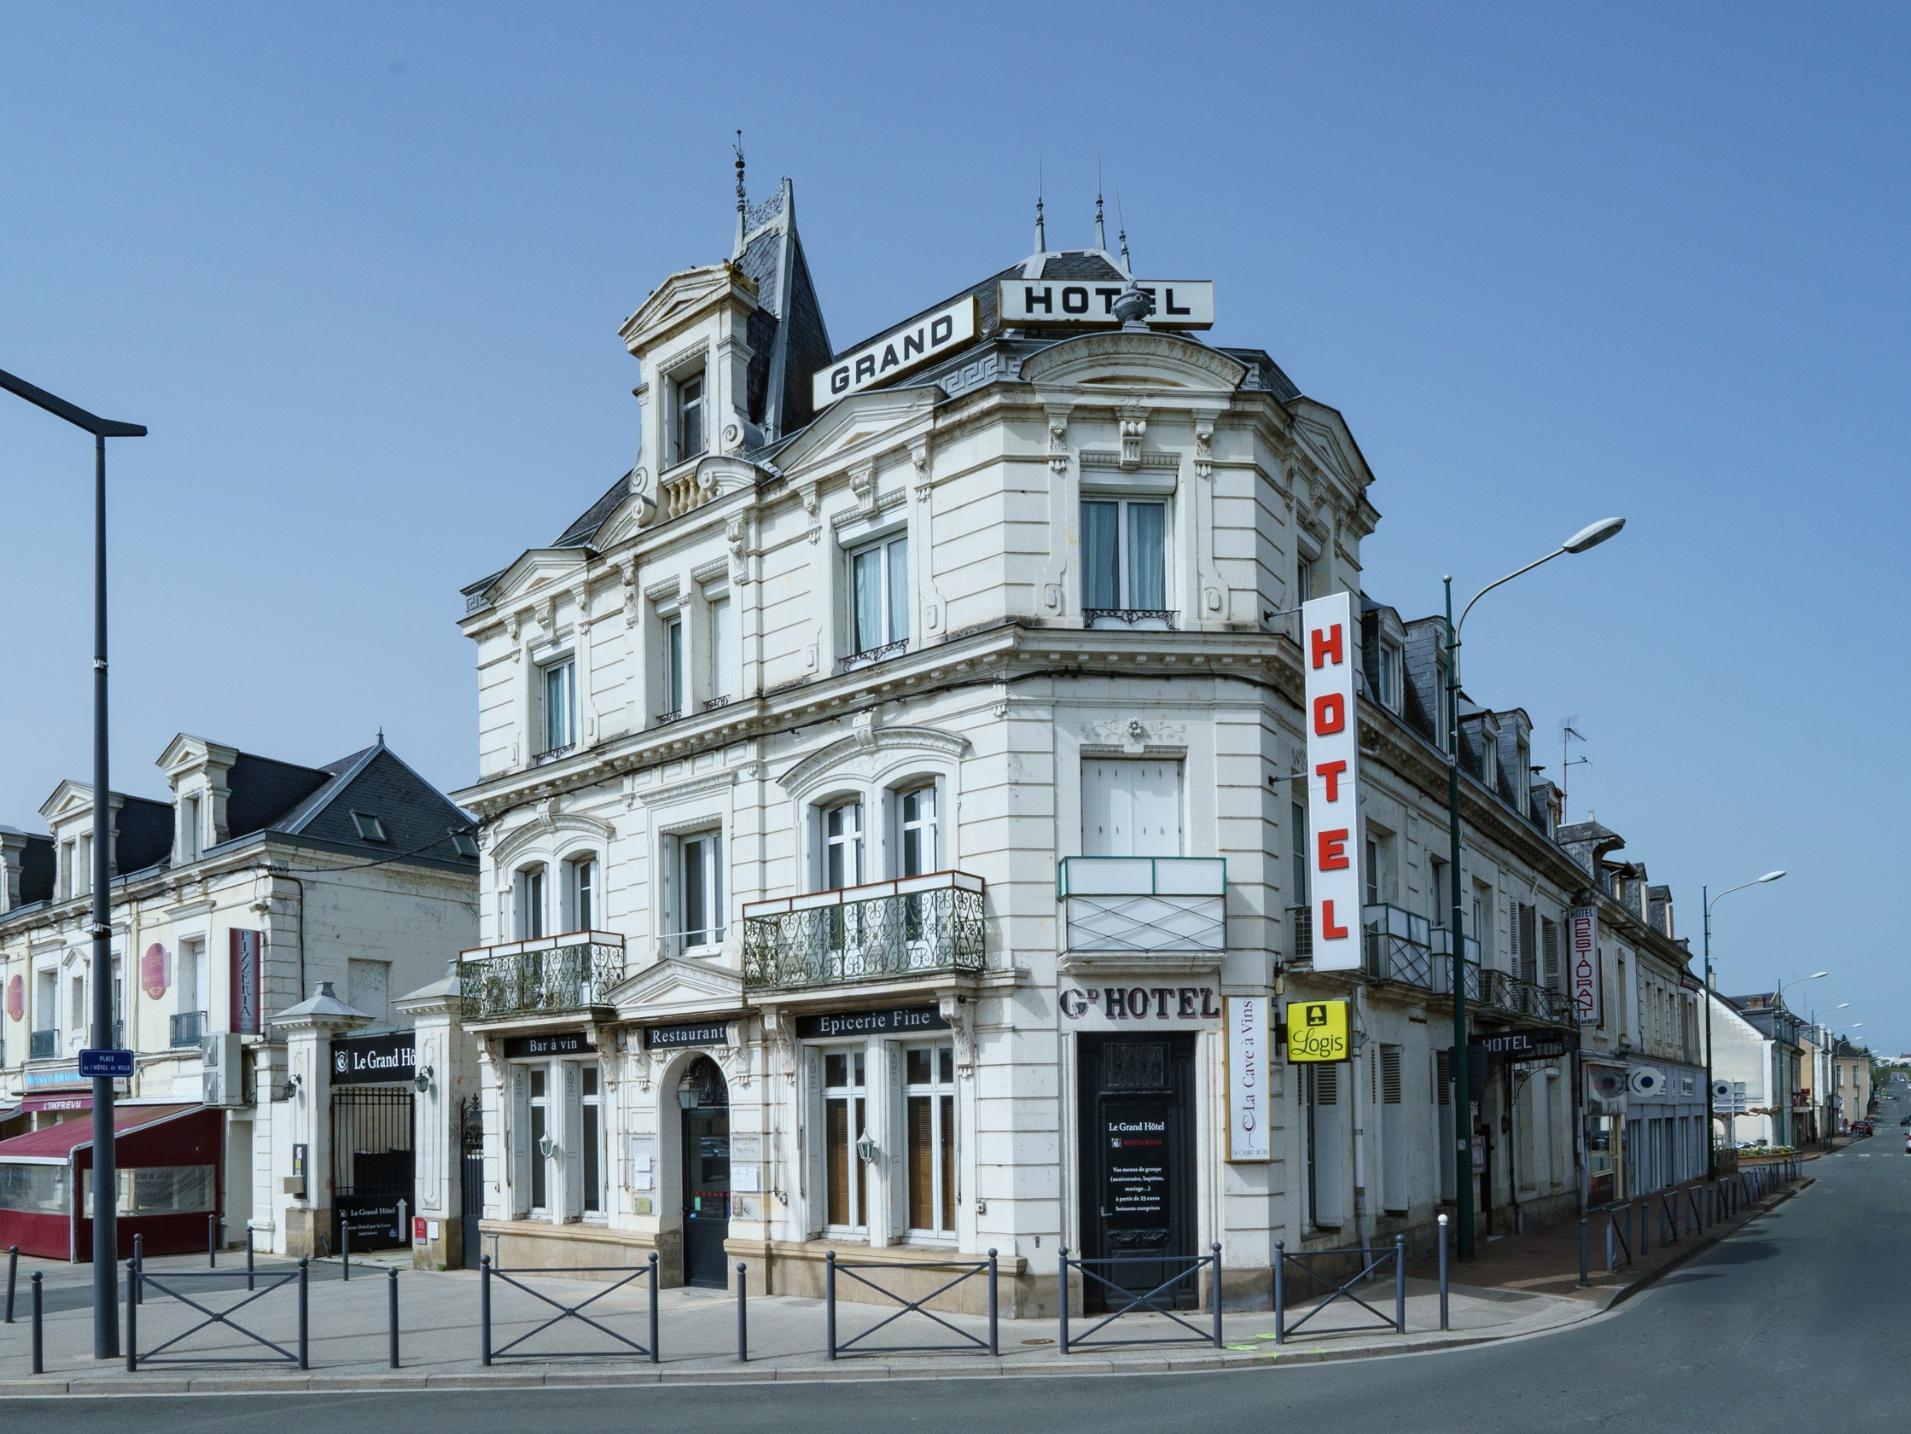 ∞ Logis Hotel *** in the heart of the Loire Castles, Le Cheval